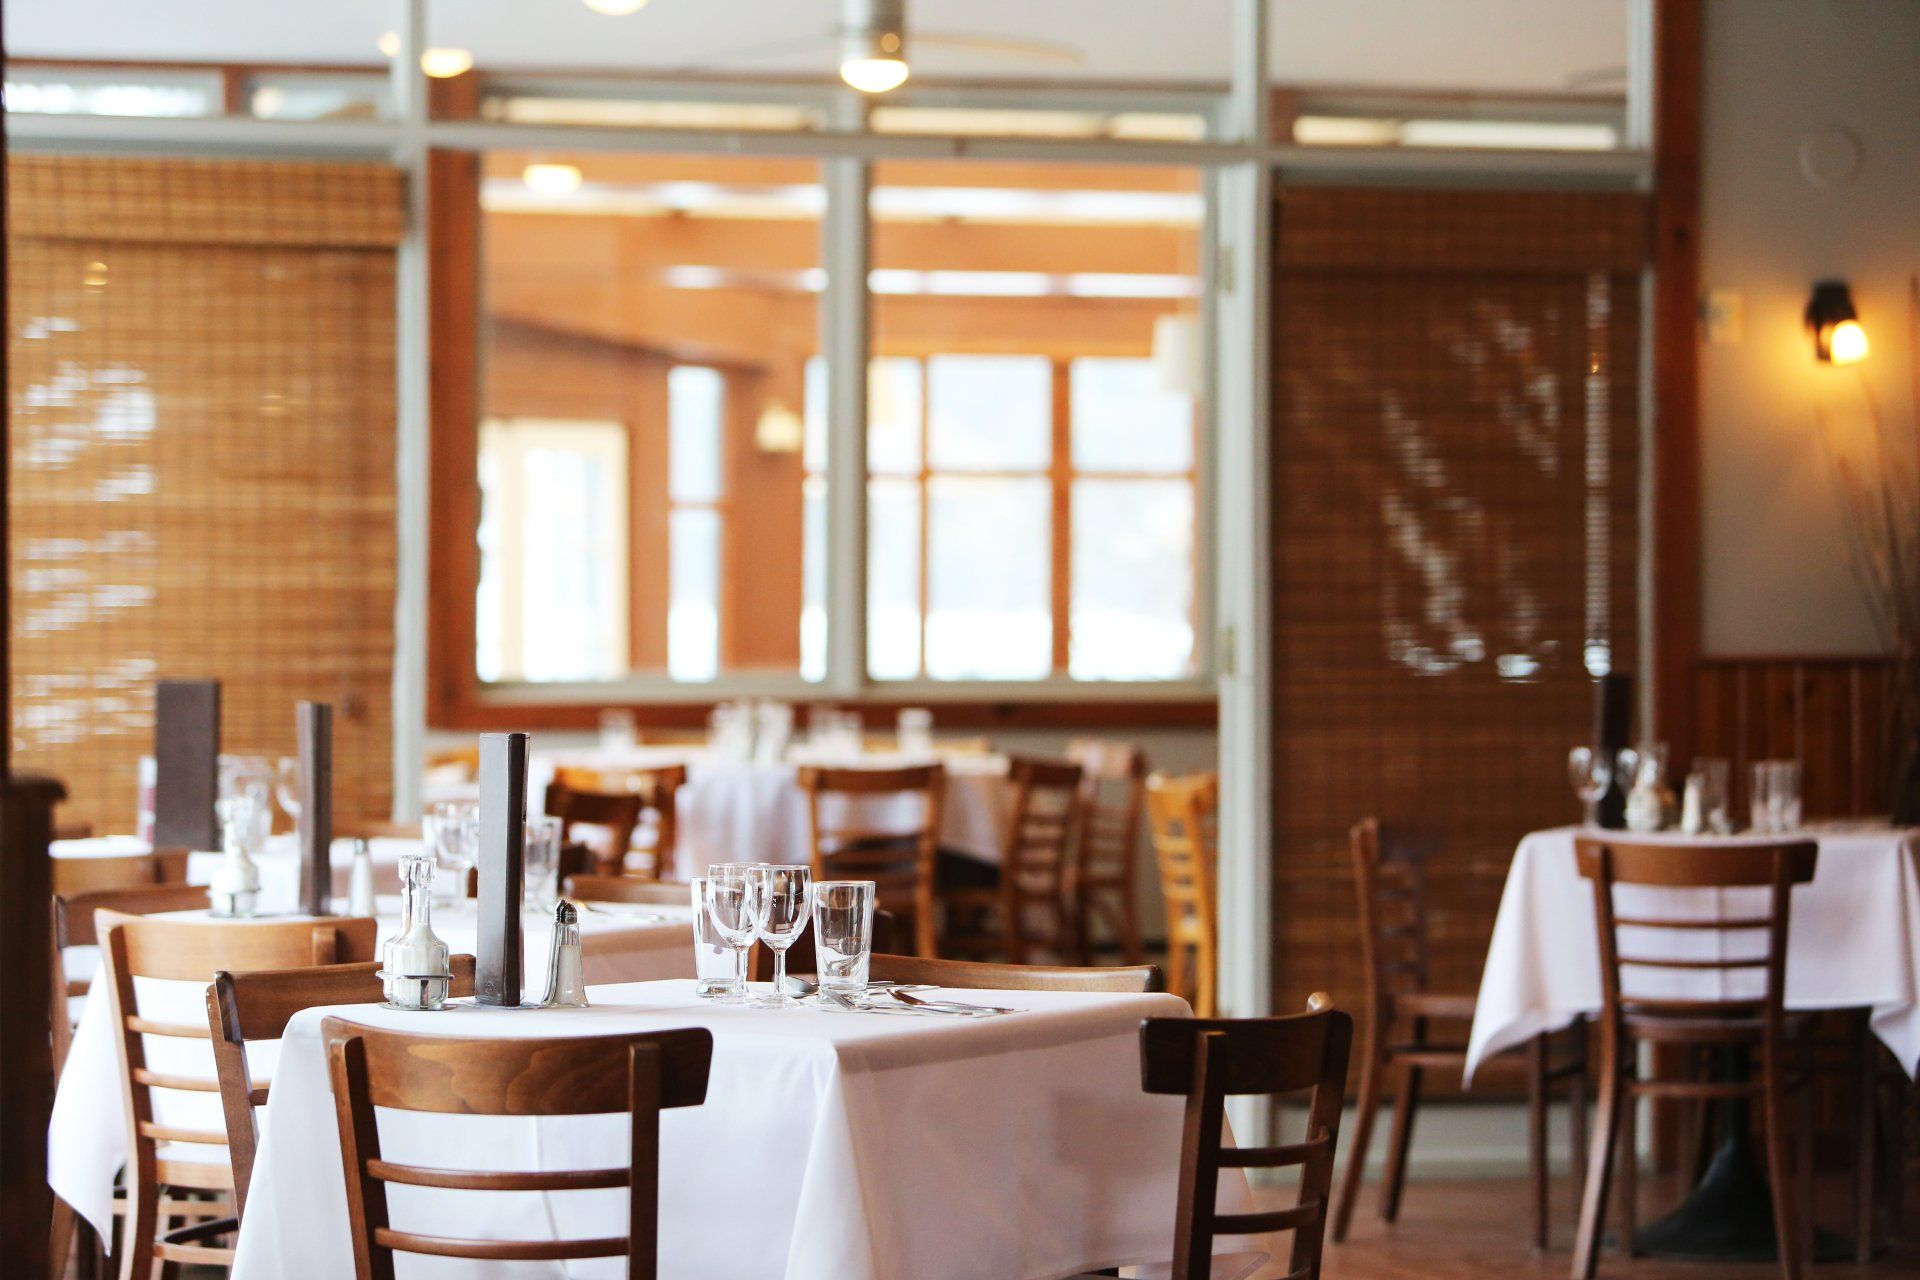 Restaurant Security Systems - WI - SECURITEL Commercial Security Systems